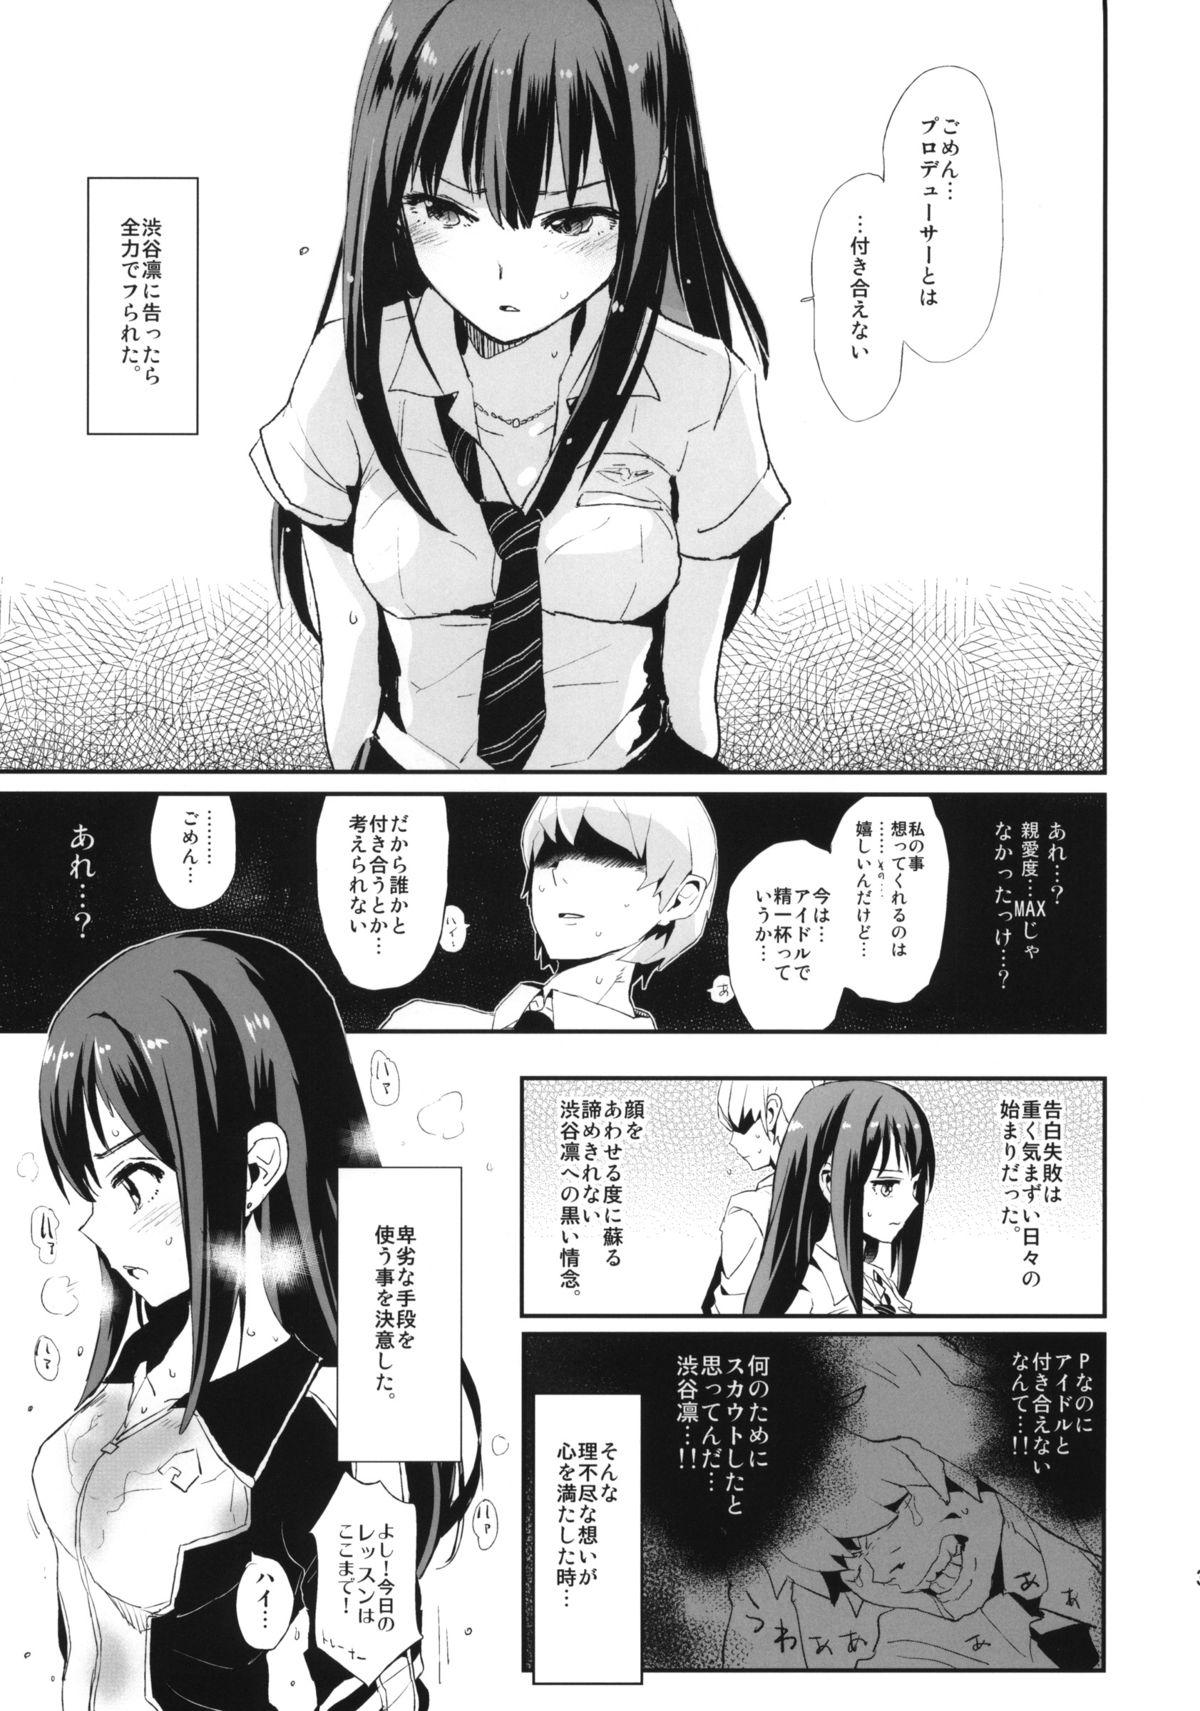 China SUIMINSHIBURIN + Paper - The idolmaster Fist - Page 3